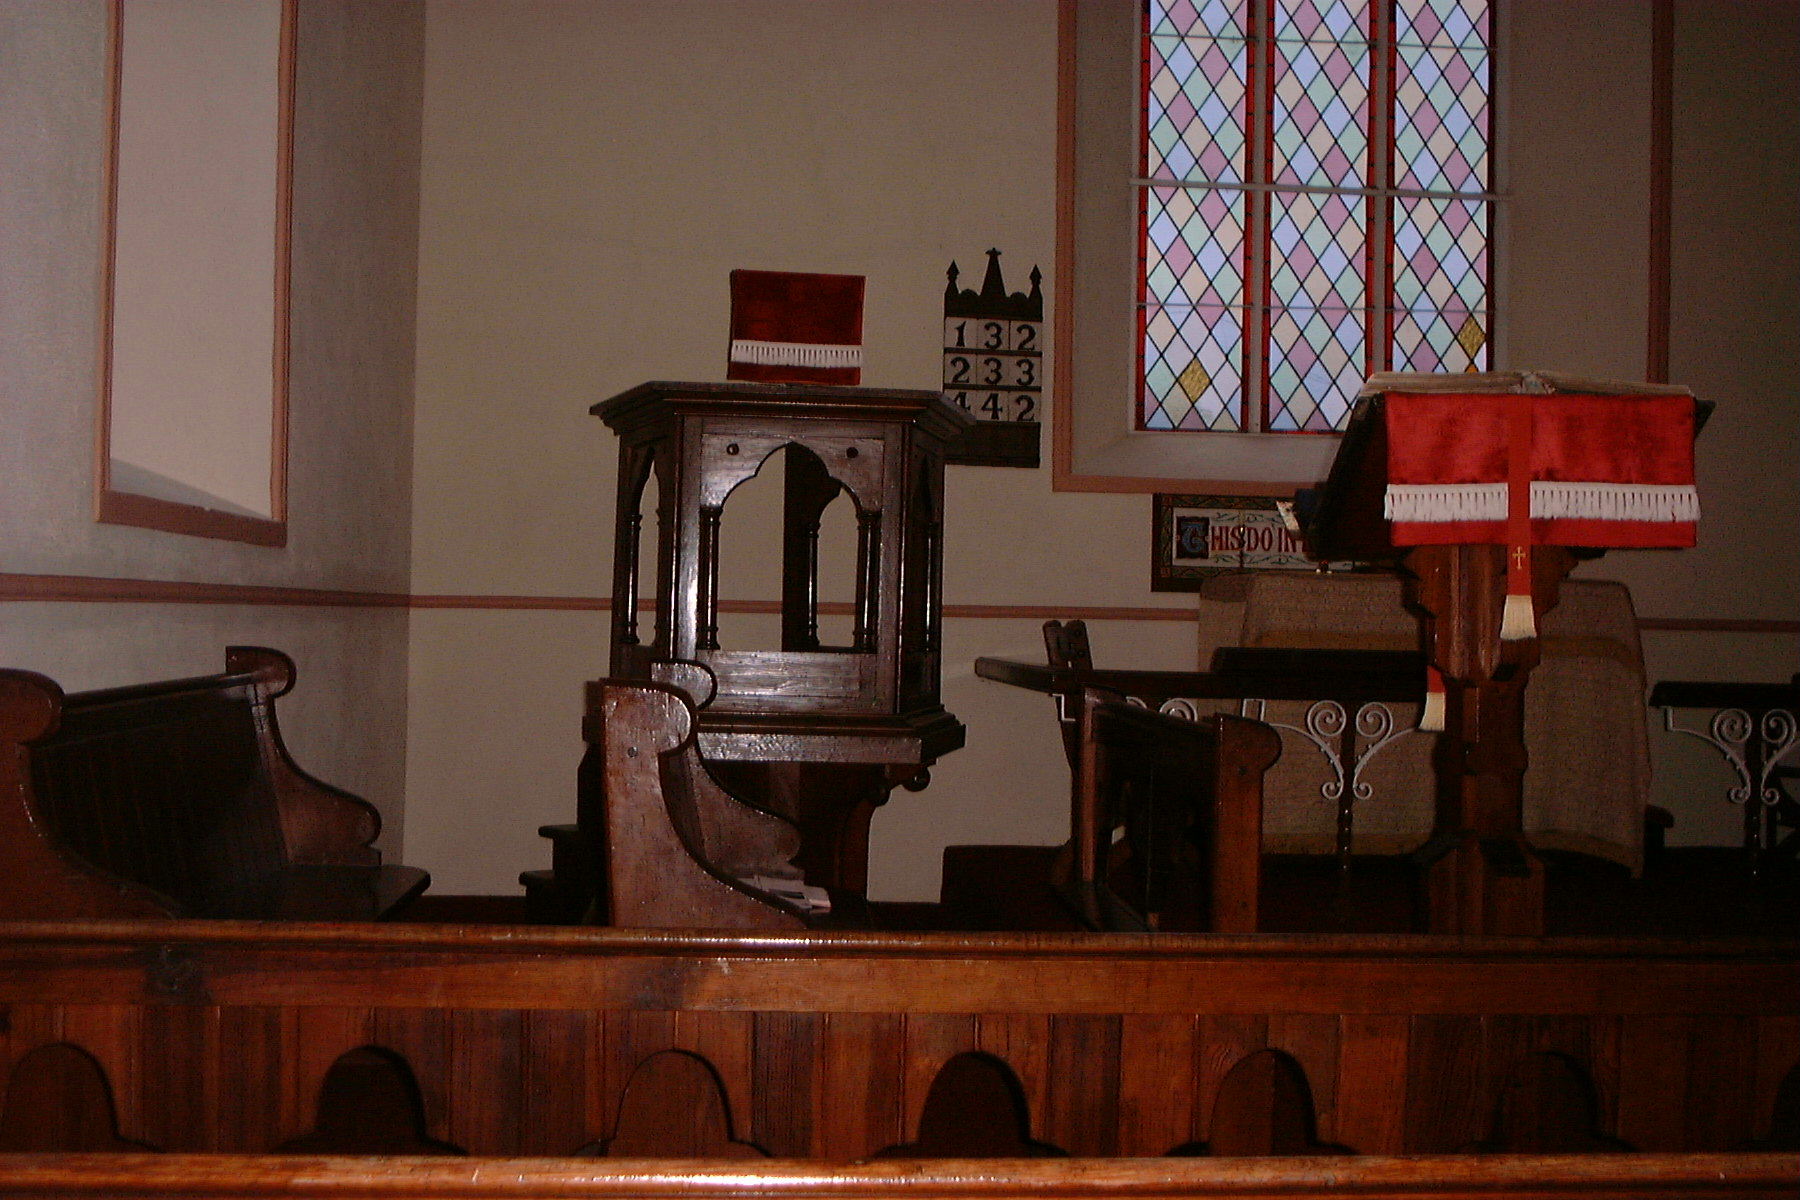 The Pulpit & Lectern